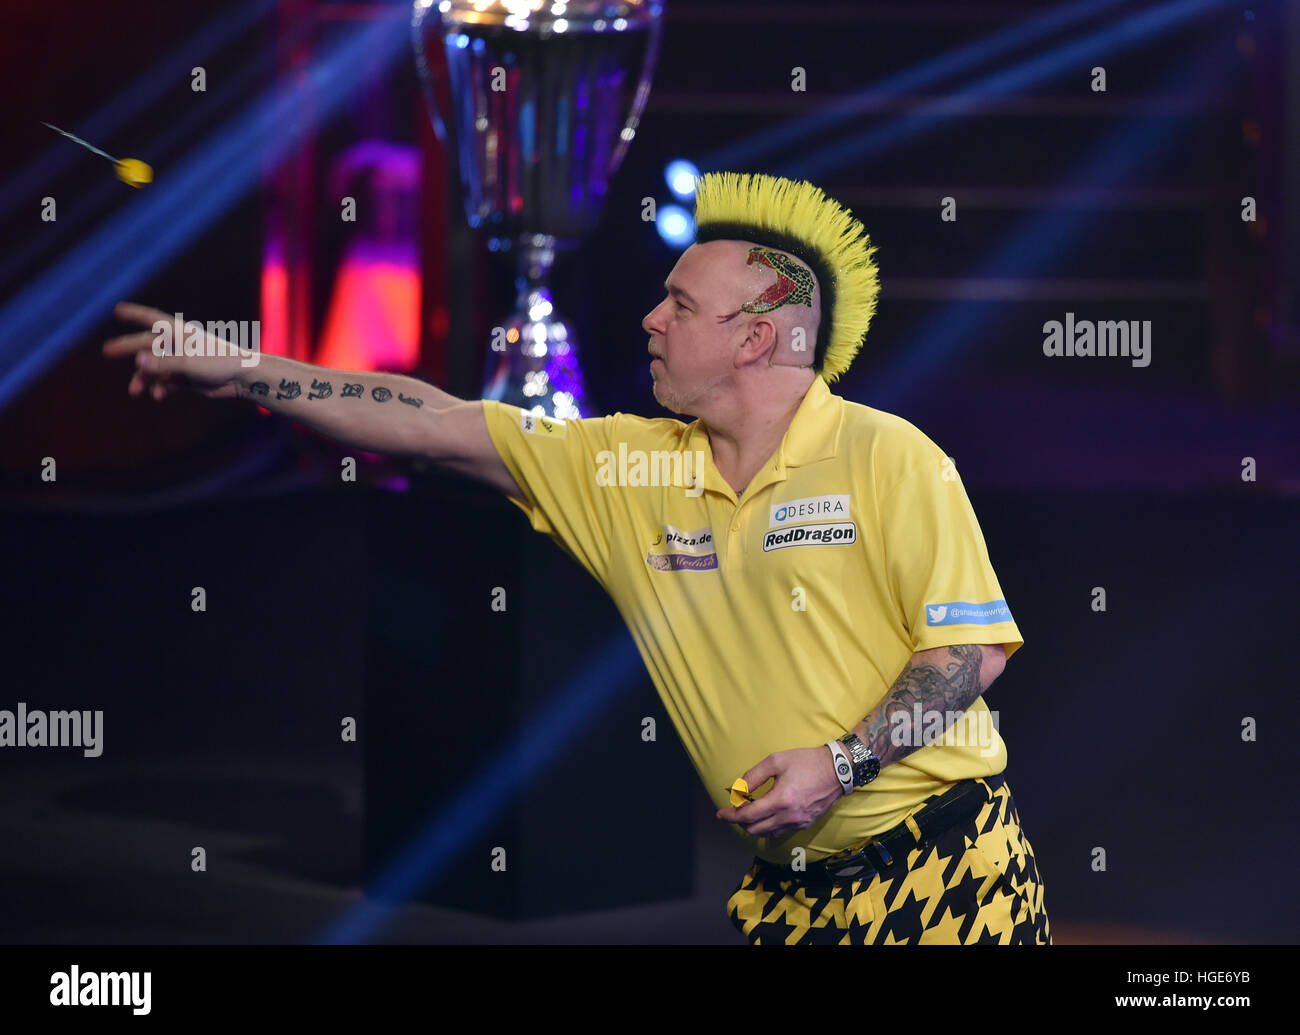 Scottish darts pro Peter Wright in action during the 'Promi-Darts-WM' event  in Duesseldorf, Germany, 07 January 2017. Photo: Caroline Seidel/dpa Stock  Photo - Alamy